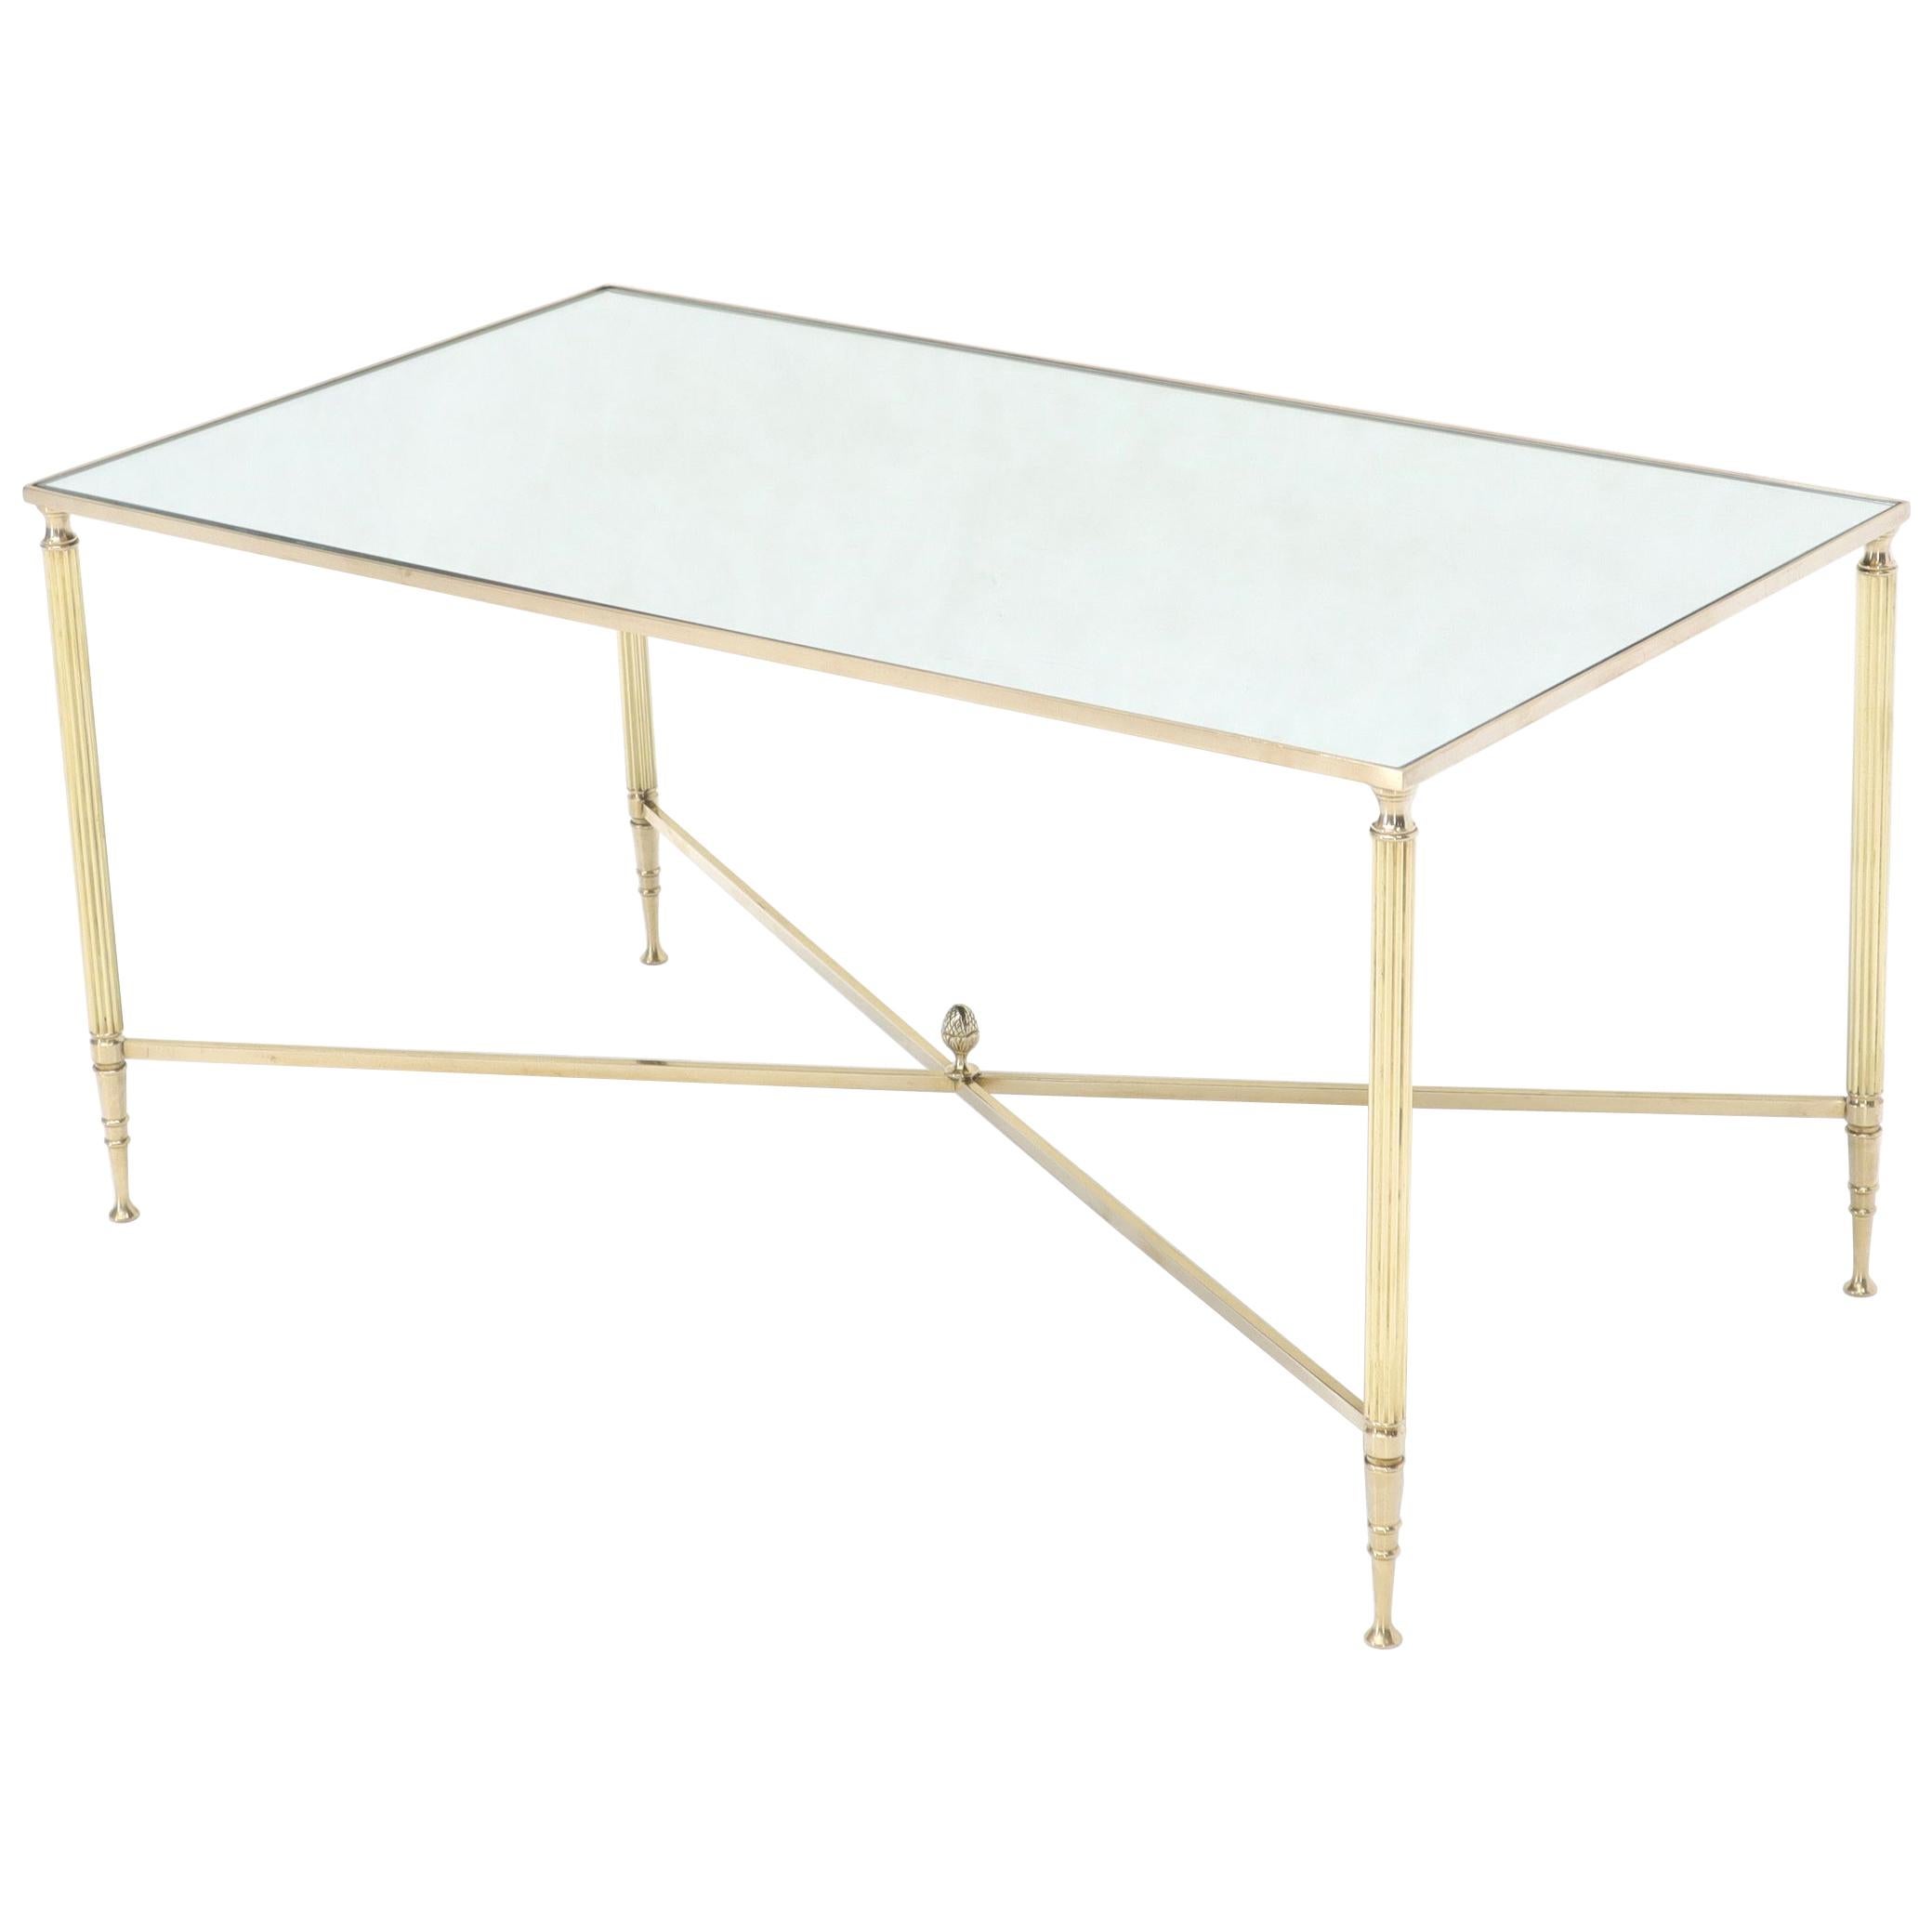 Polished Brass X-Stretcher Base Fluted Legs Mirrored Glass Top Coffee Table For Sale